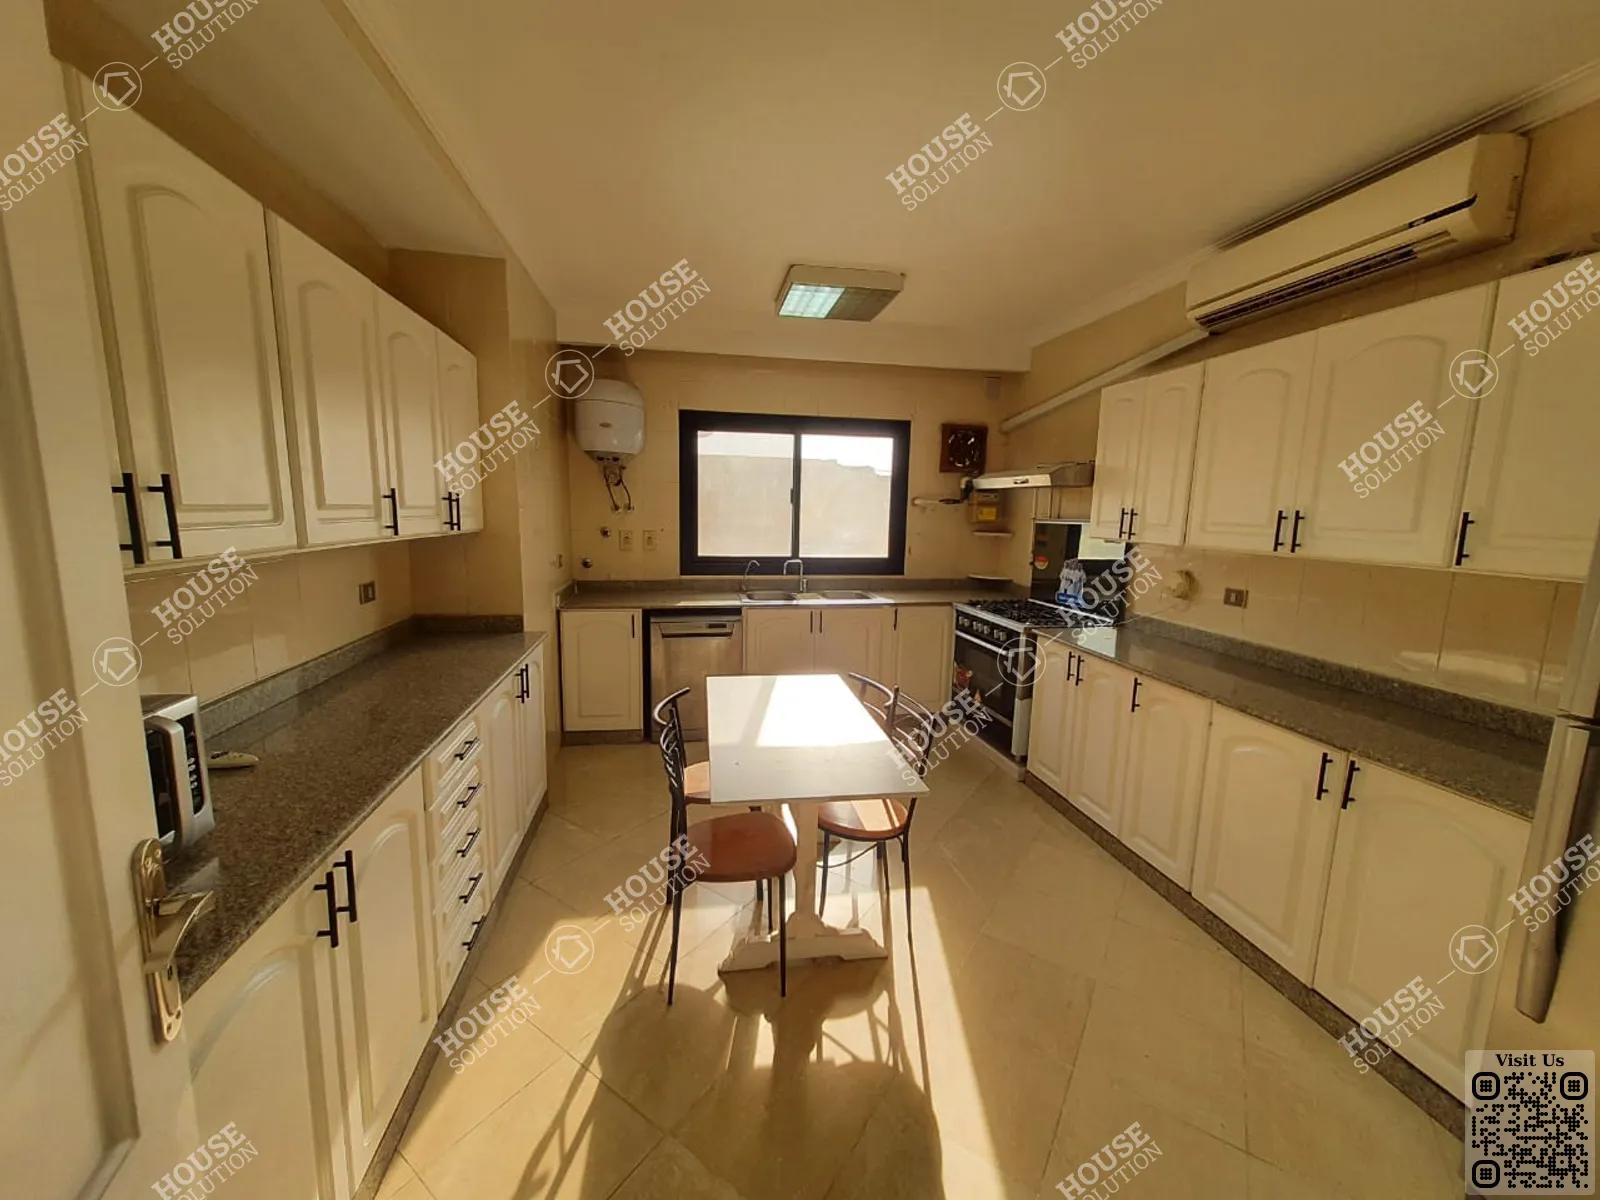 KITCHEN  @ Apartments For Rent In Maadi Maadi Degla Area: 350 m² consists of 4 Bedrooms 4 Bathrooms Modern furnished 5 stars #5455-1